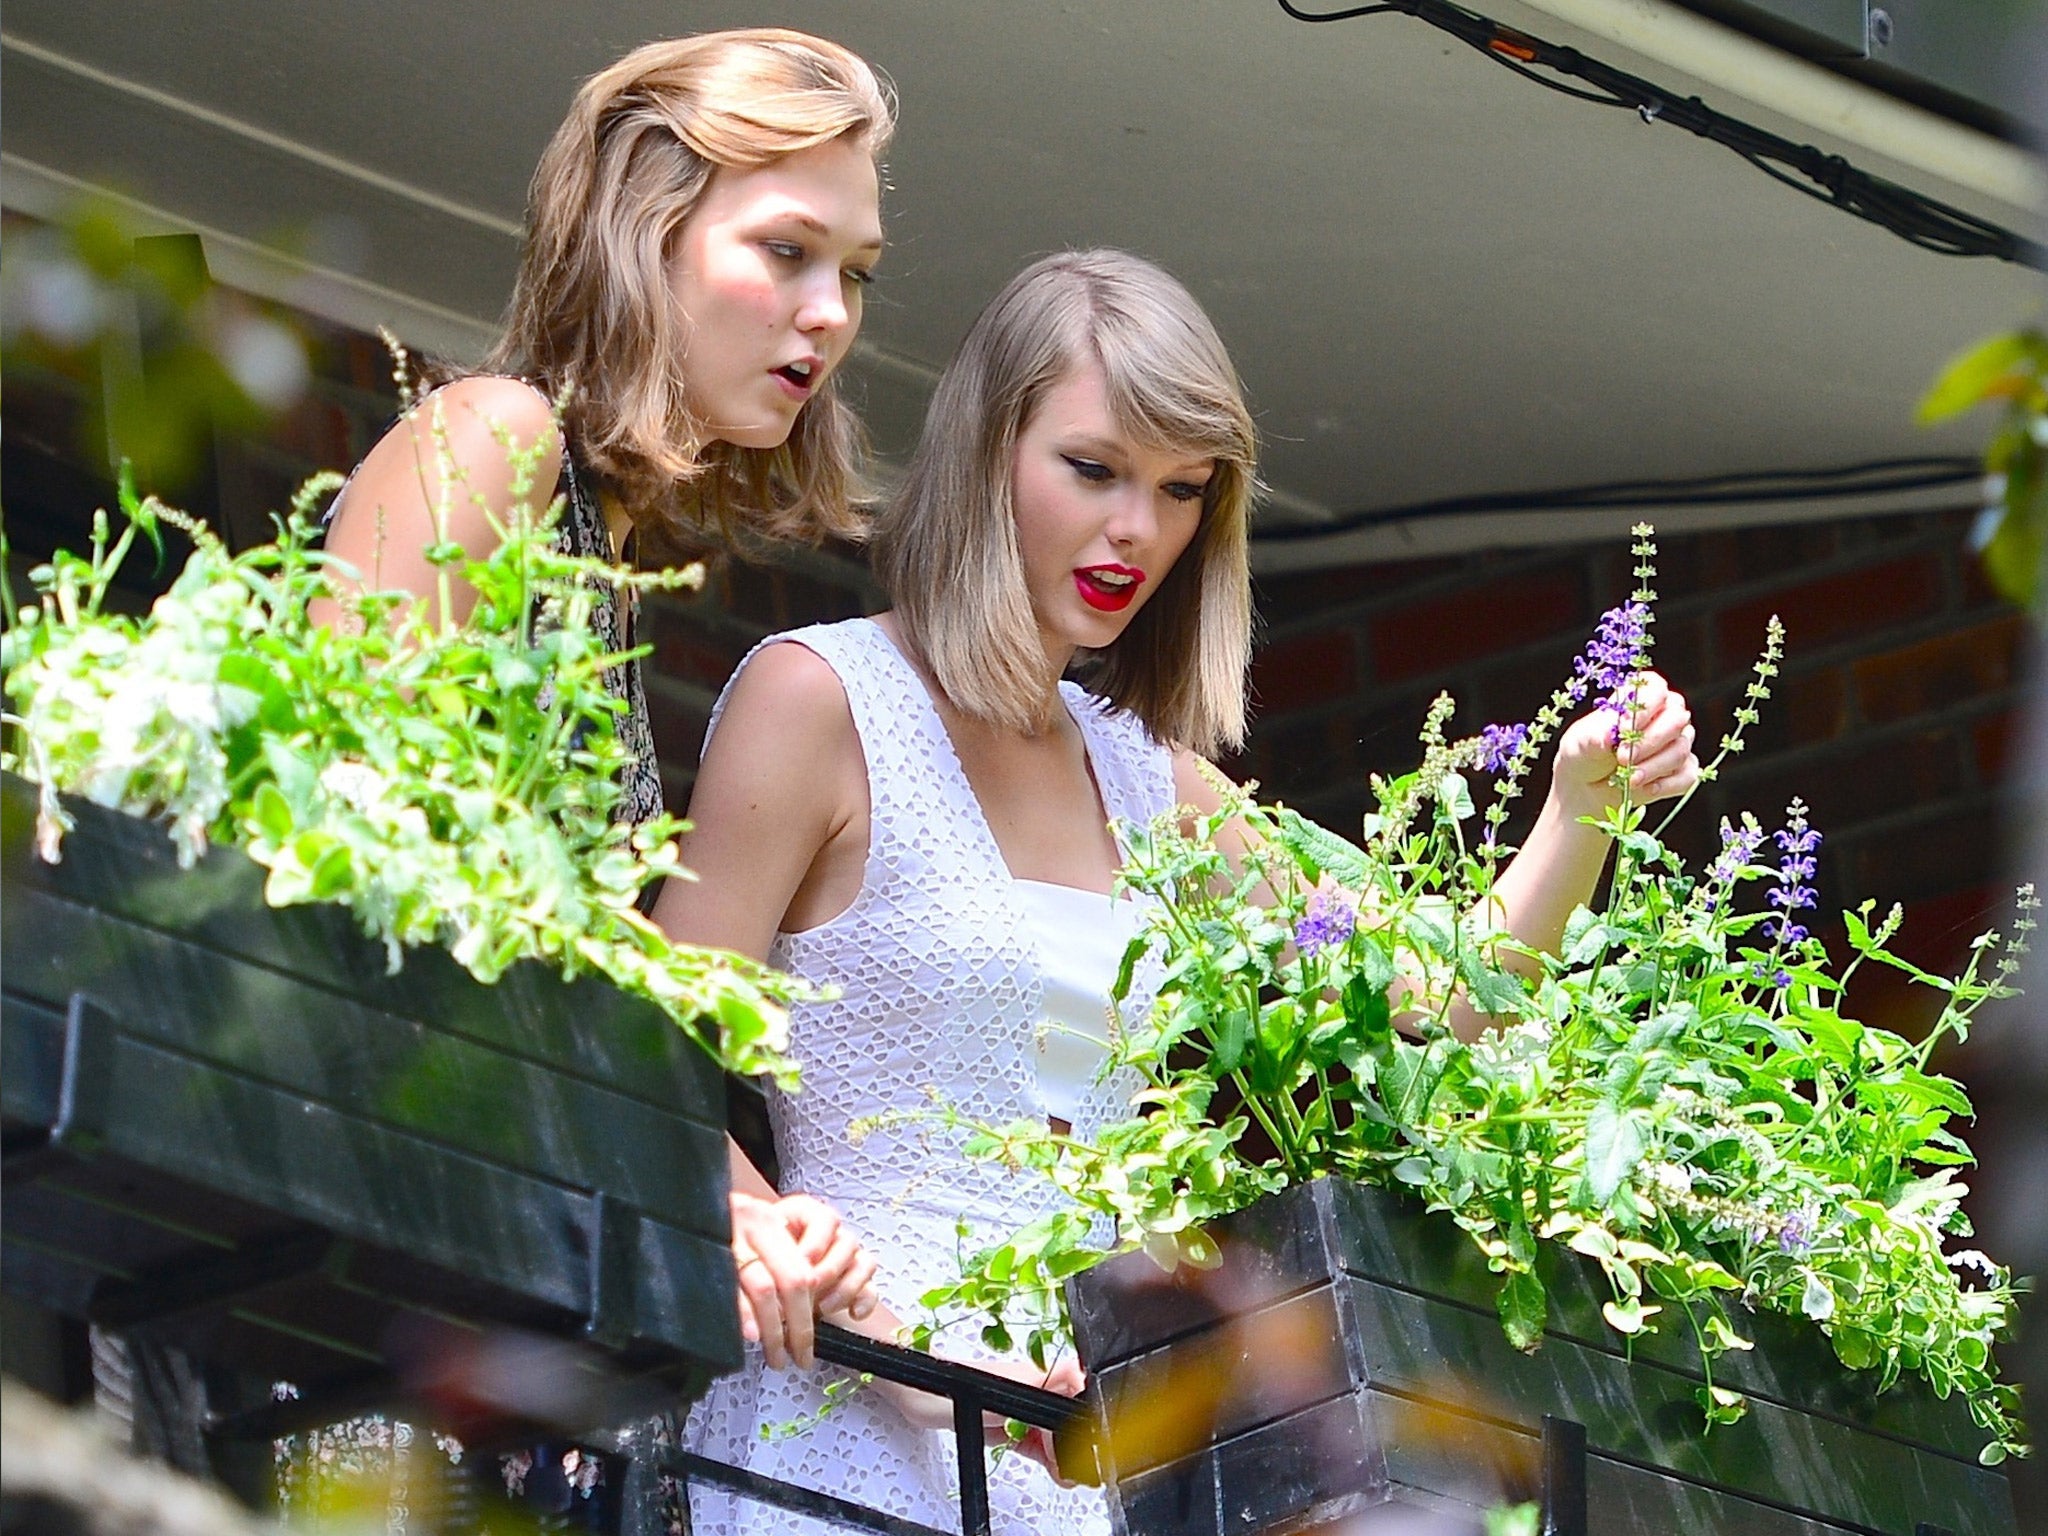 Salad days: singer Taylor Swift and model Karlie Kloss tend to their window box